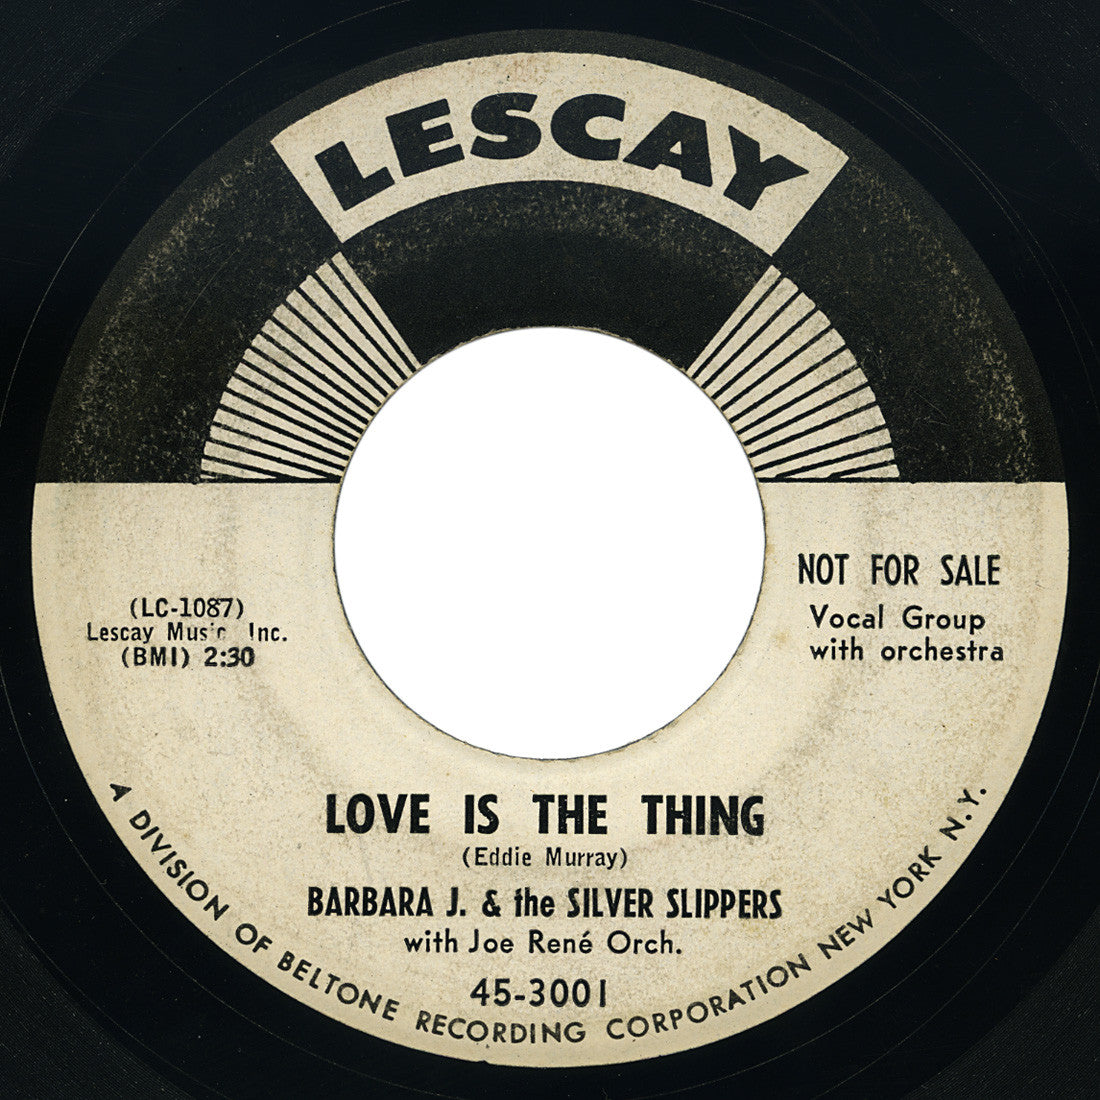 Barbara J. & The Silver Slippers – Love Is The Thing – Lescay